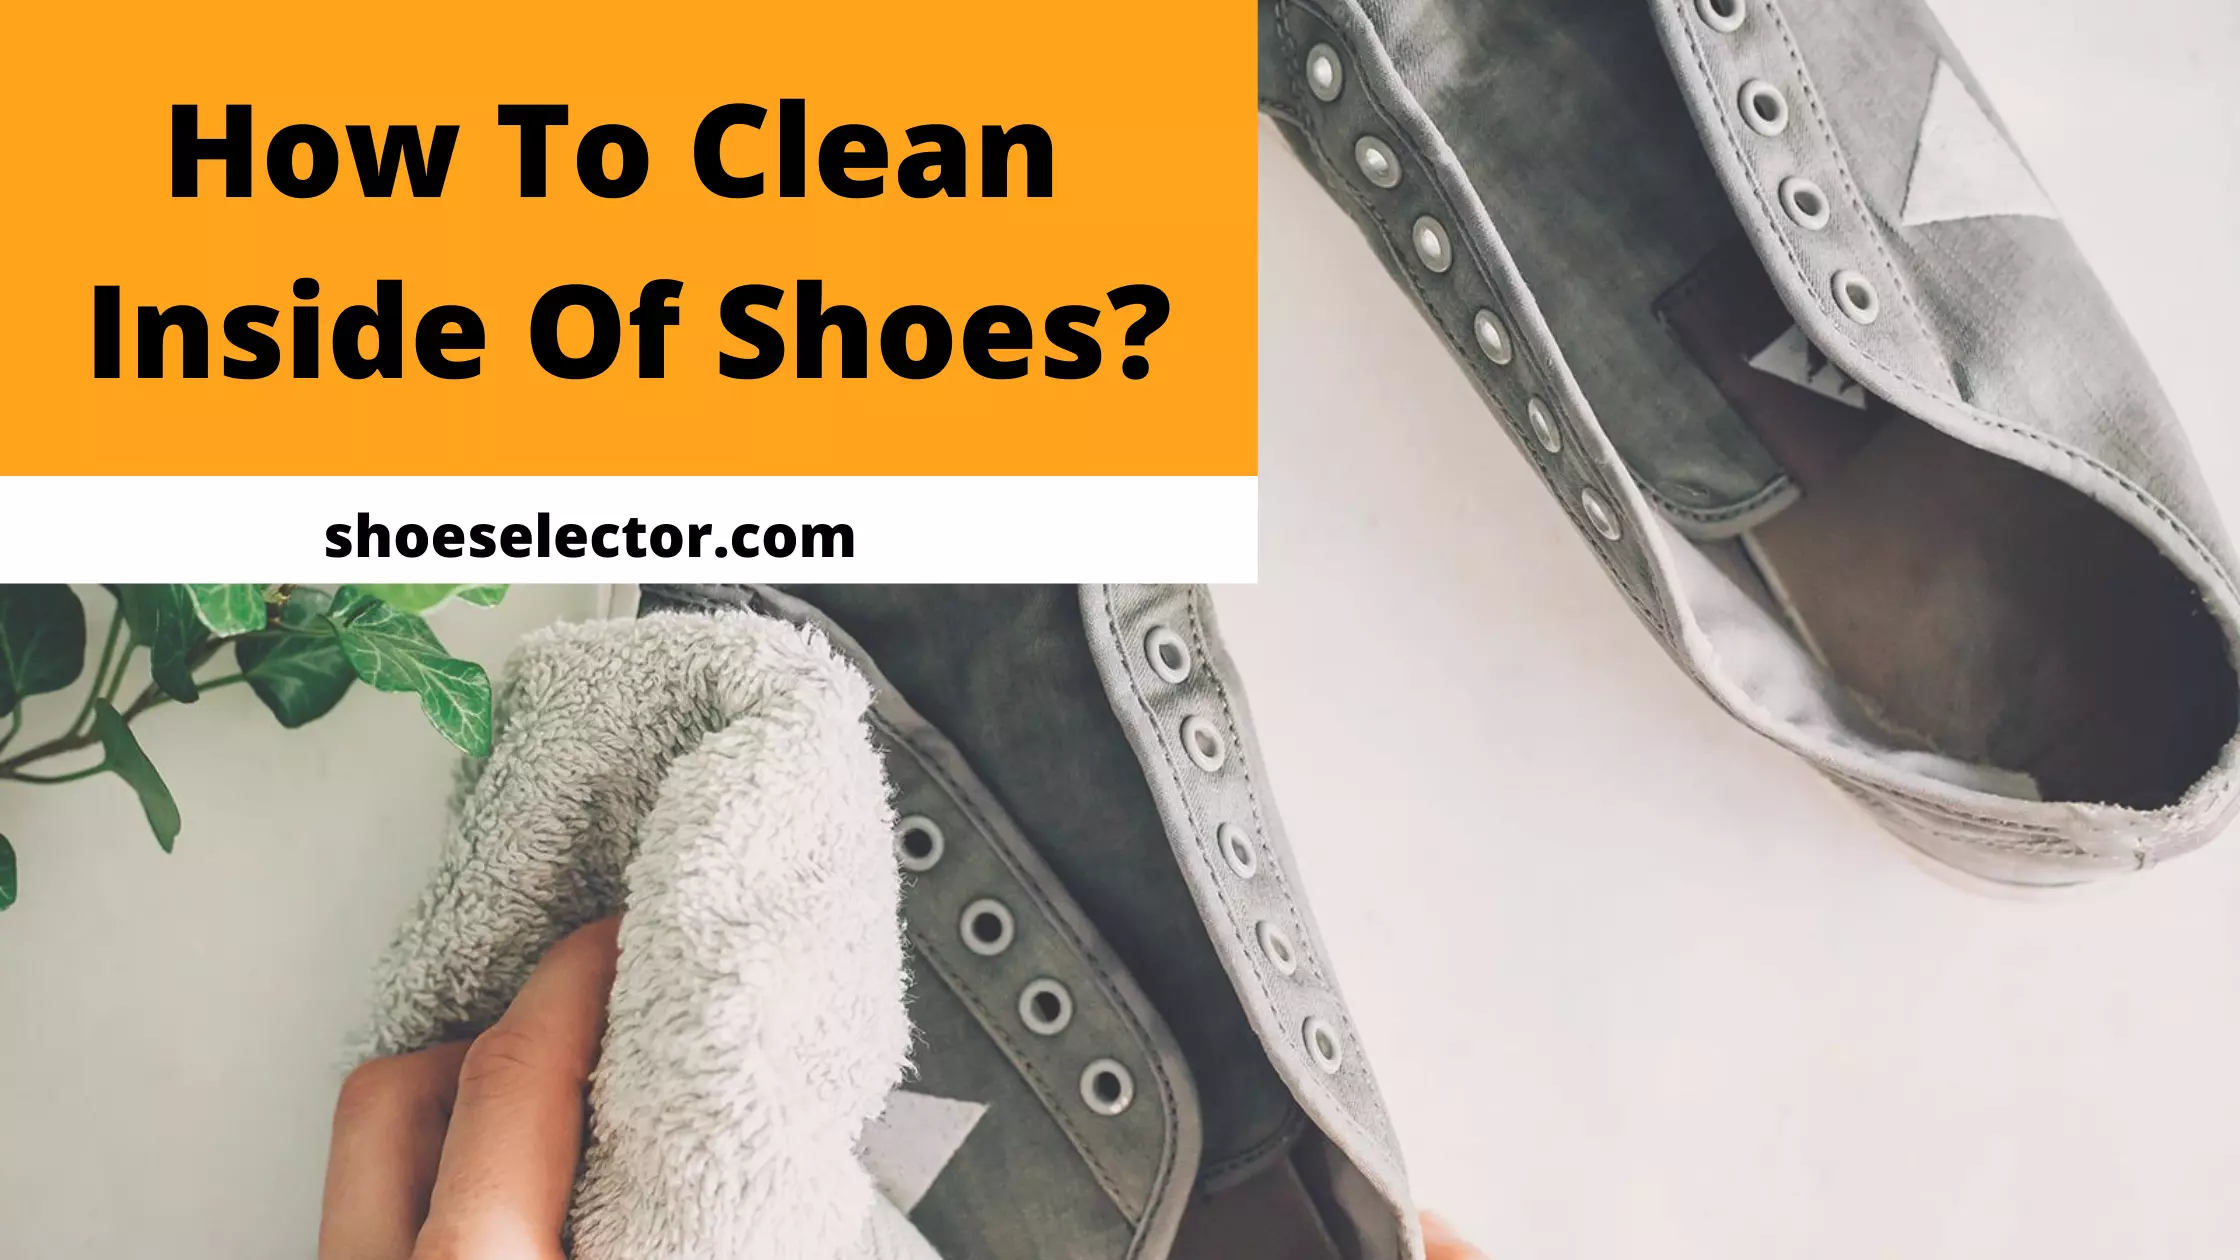 How To Clean Inside Of Shoes? - Complete Guide